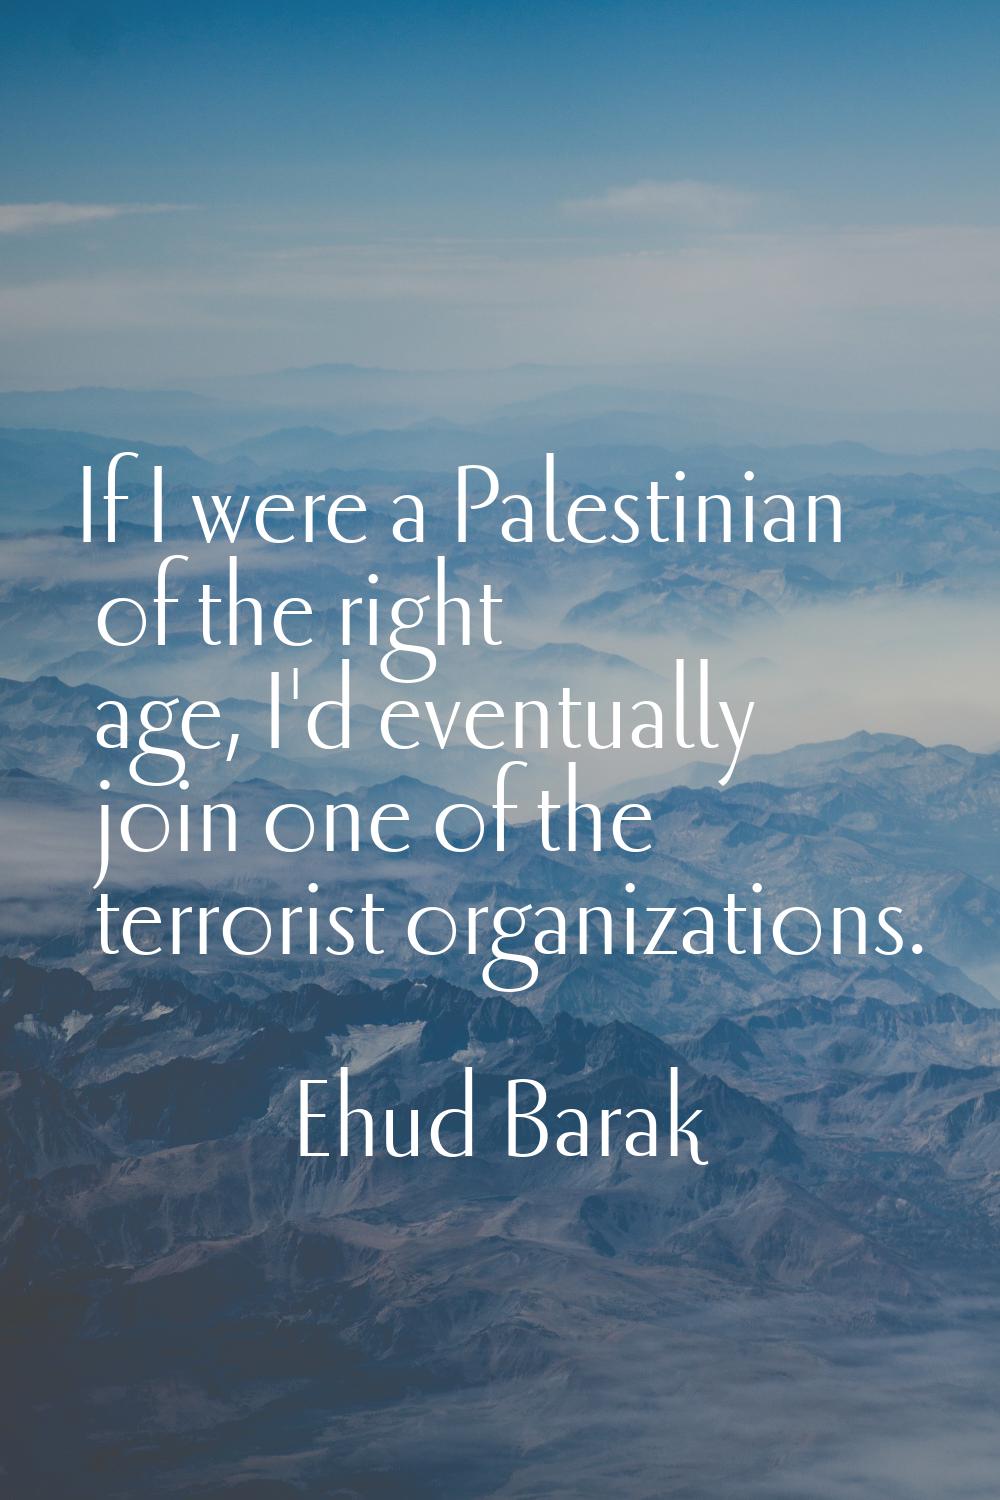 If I were a Palestinian of the right age, I'd eventually join one of the terrorist organizations.